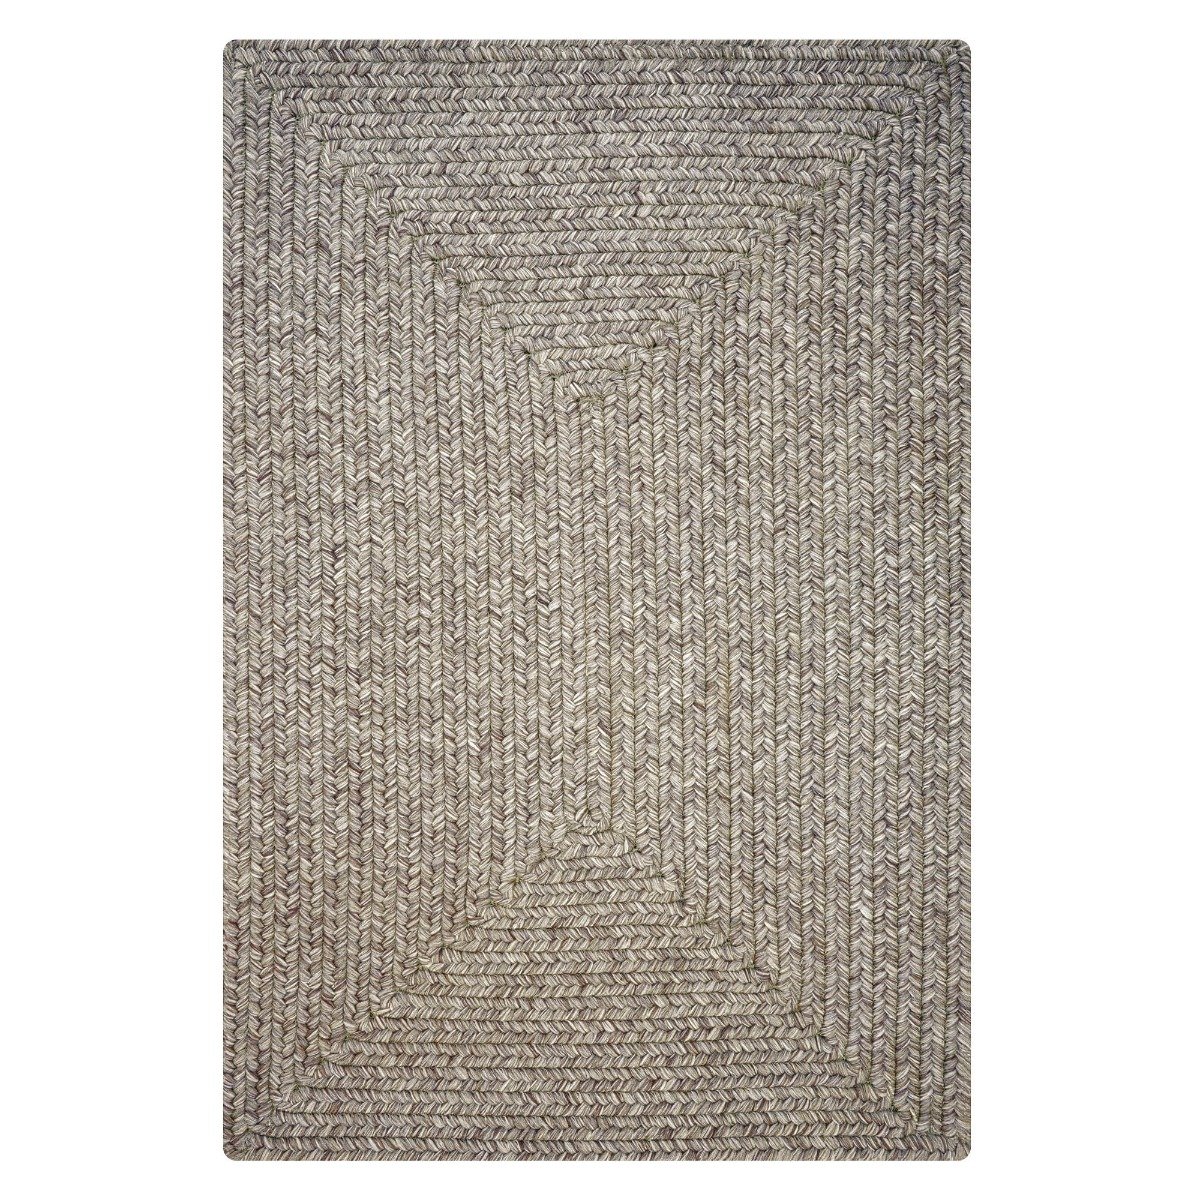 Cocoa Bean Black - Grey Cotton Braided Oval Rugs